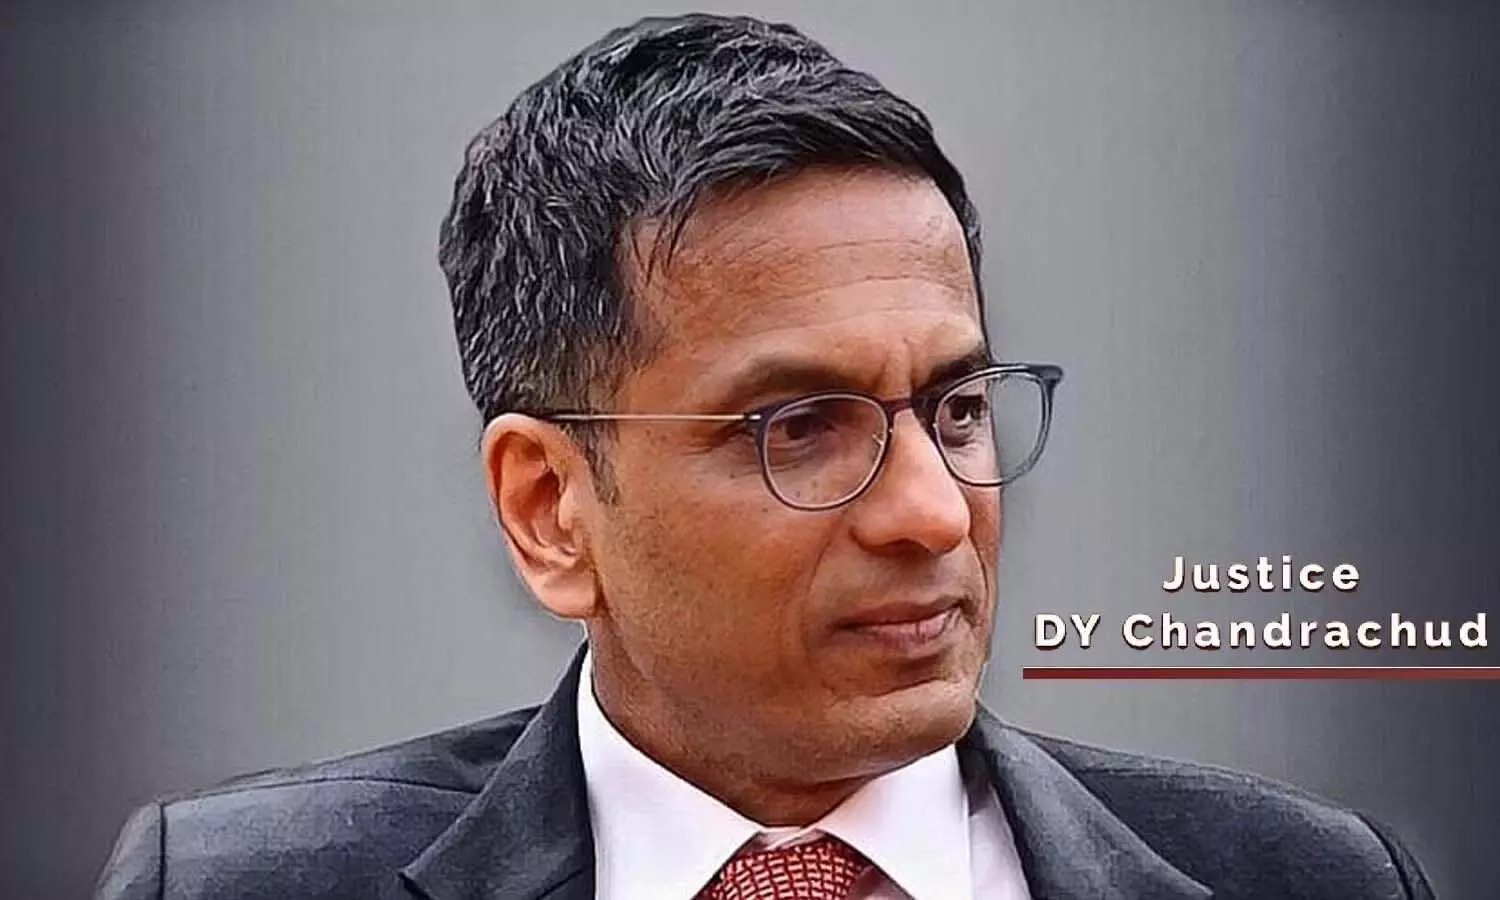 Justice Chandrachud has given many big decisions, known for his different views